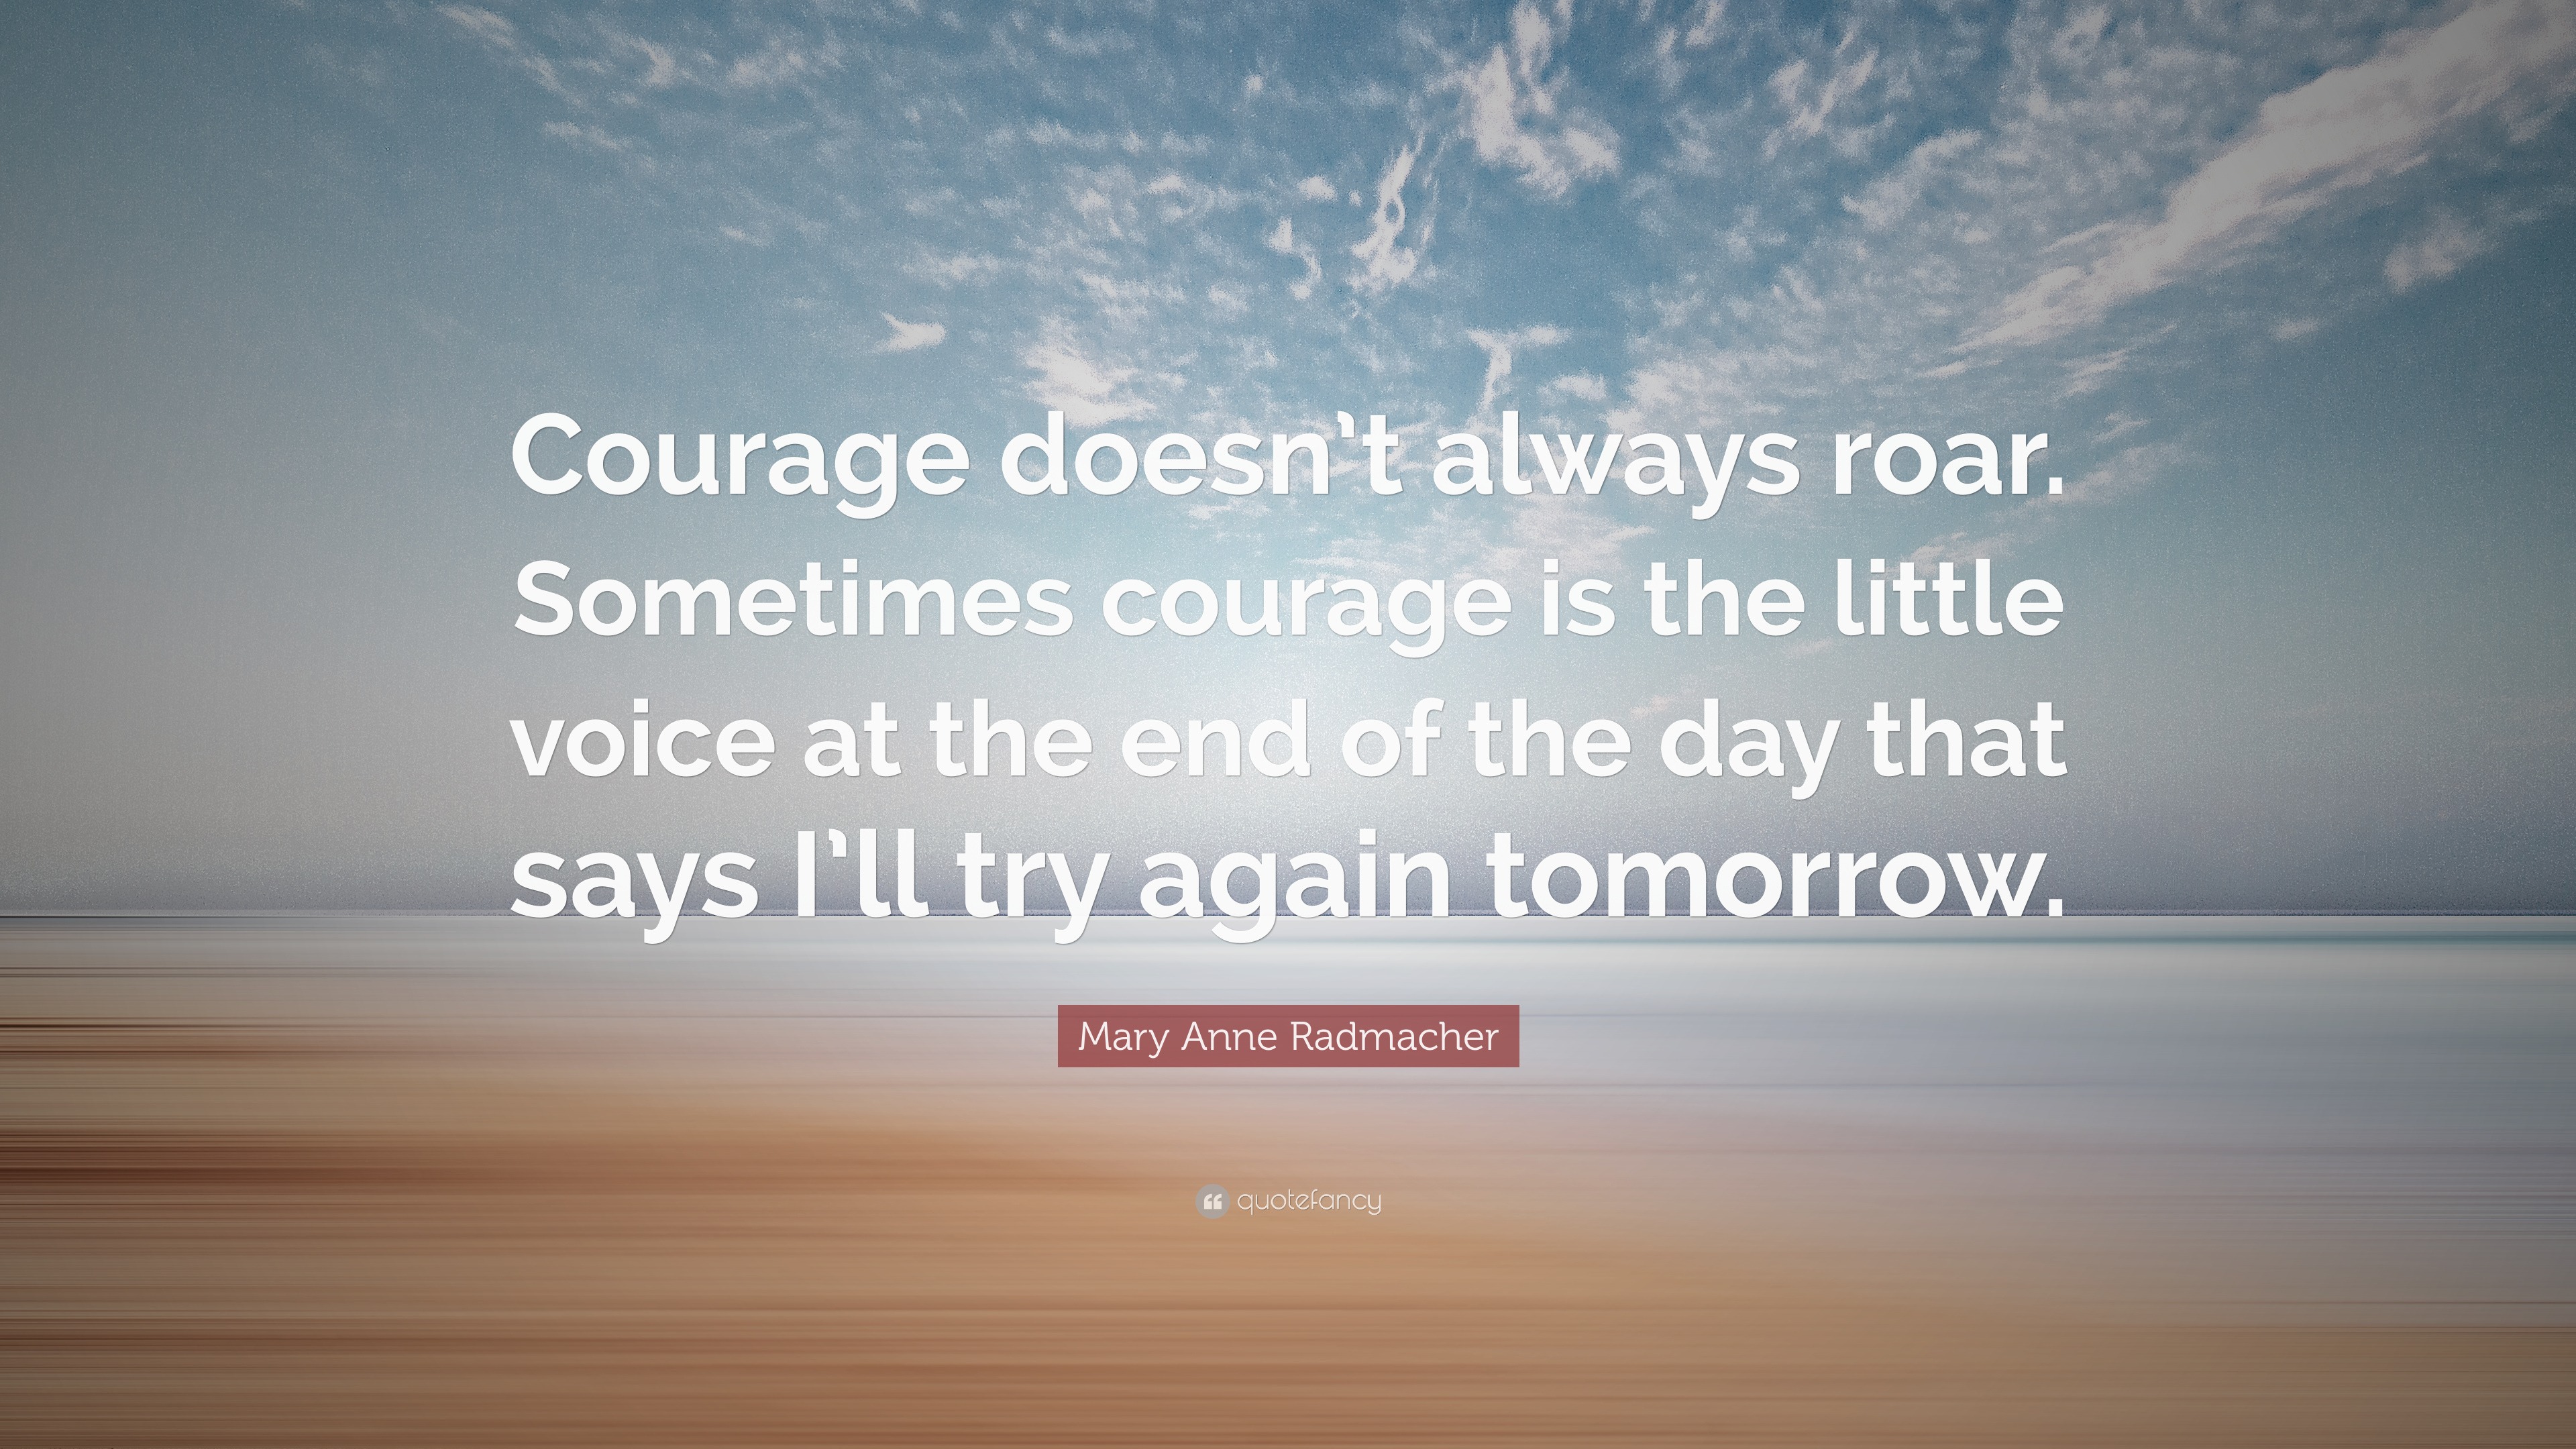 Mary Anne Radmacher Quote: "Courage doesn't always roar. Sometimes courage is the little voice ...